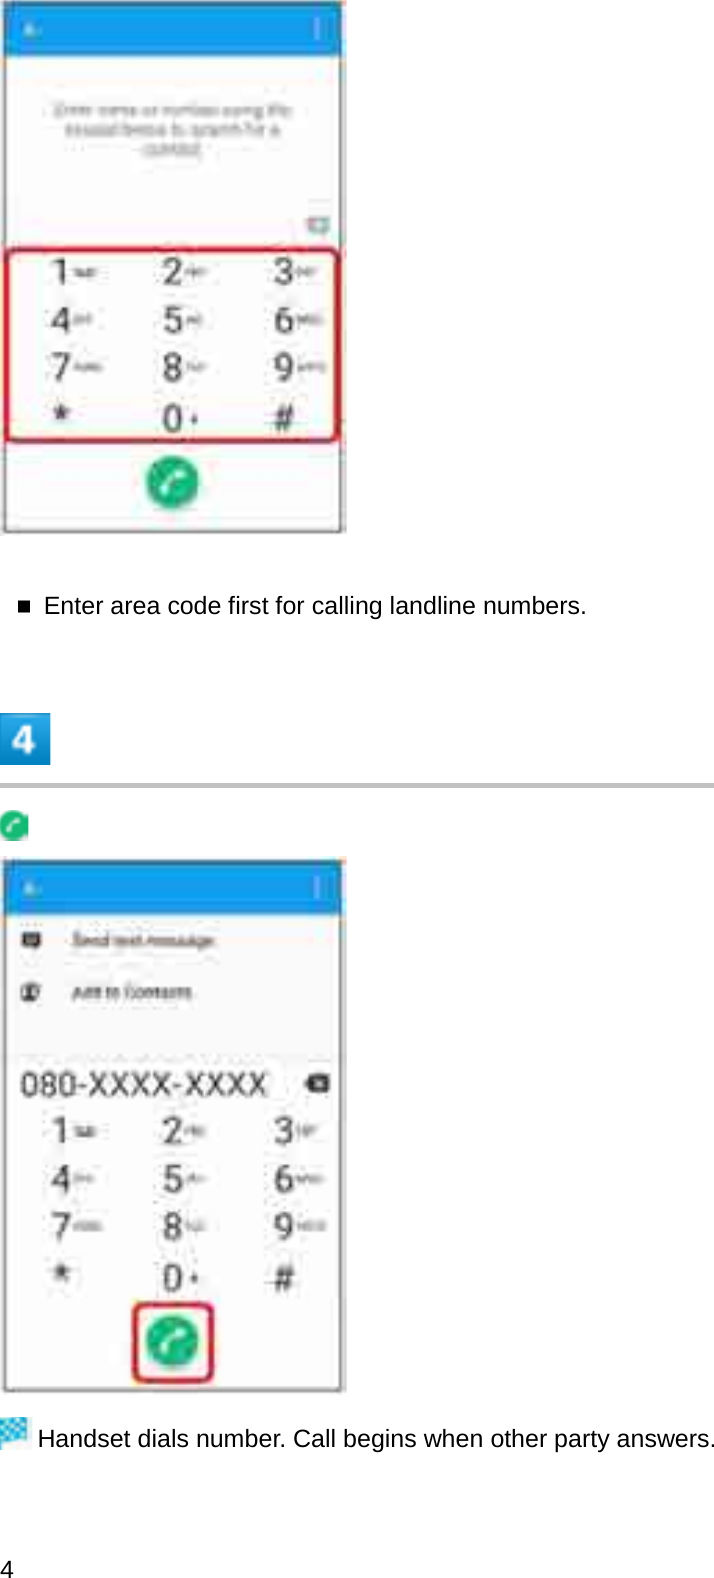 Enter area code first for calling landline numbers.Handset dials number. Call begins when other party answers.4